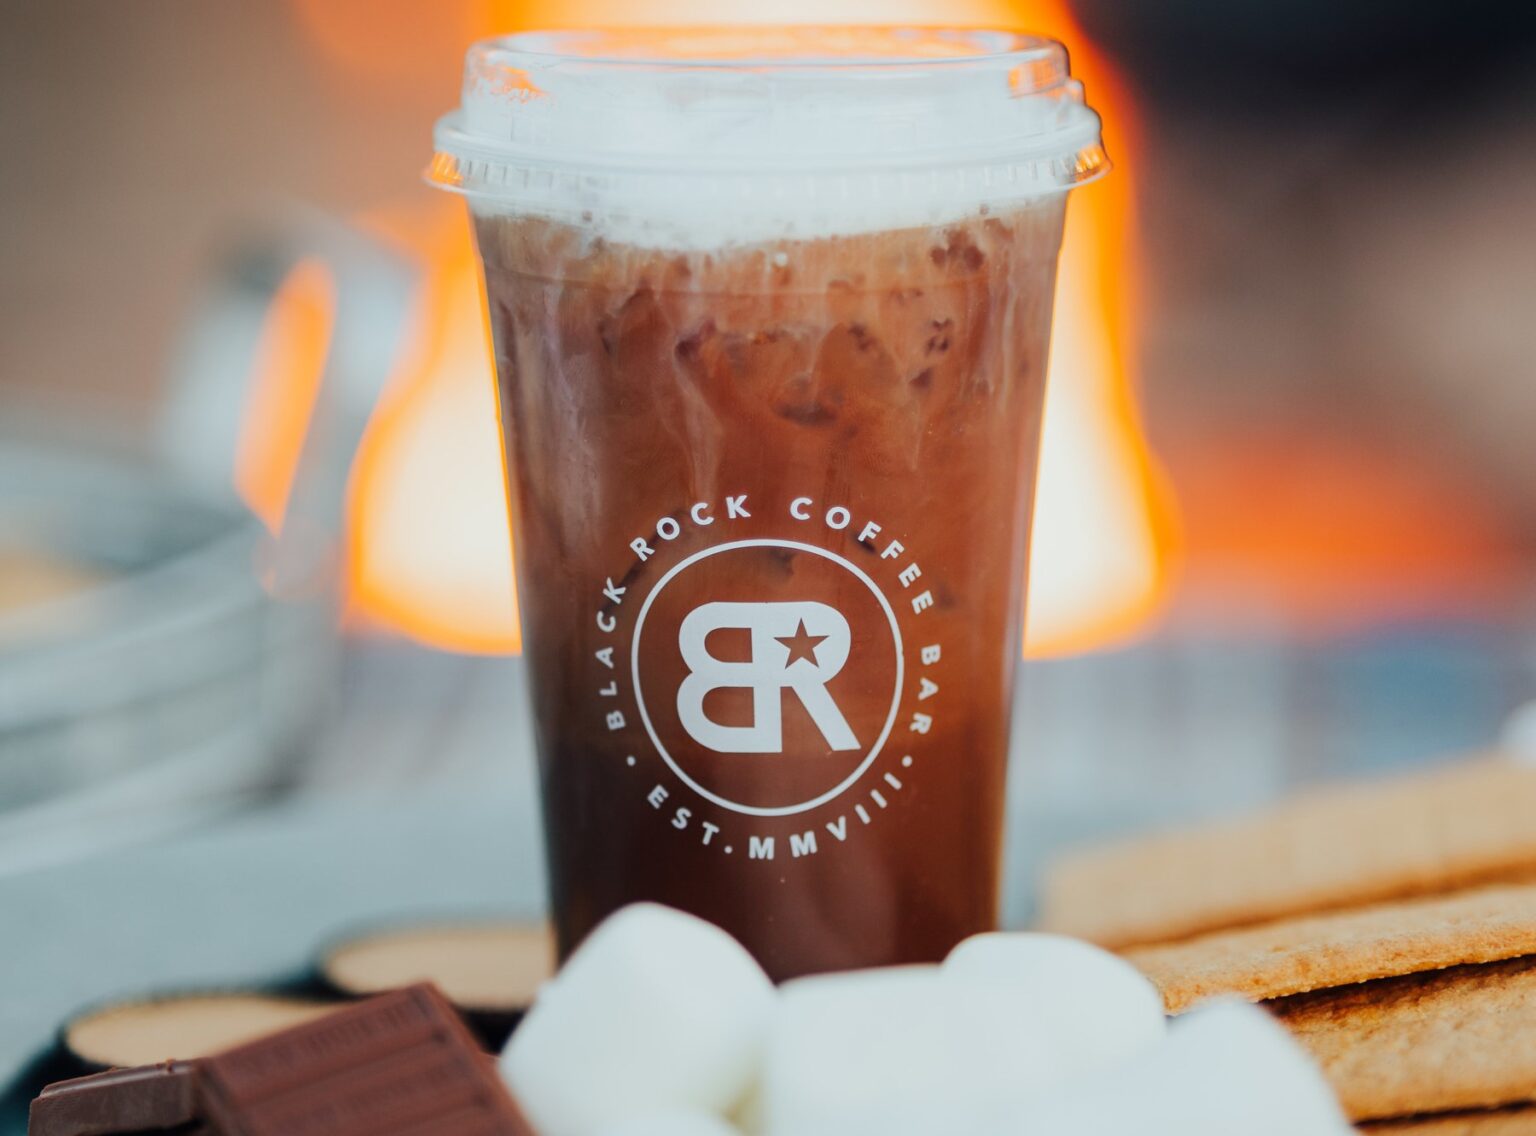 Black Rock Coffee Bar infuses a taste of nostalgia into the summer